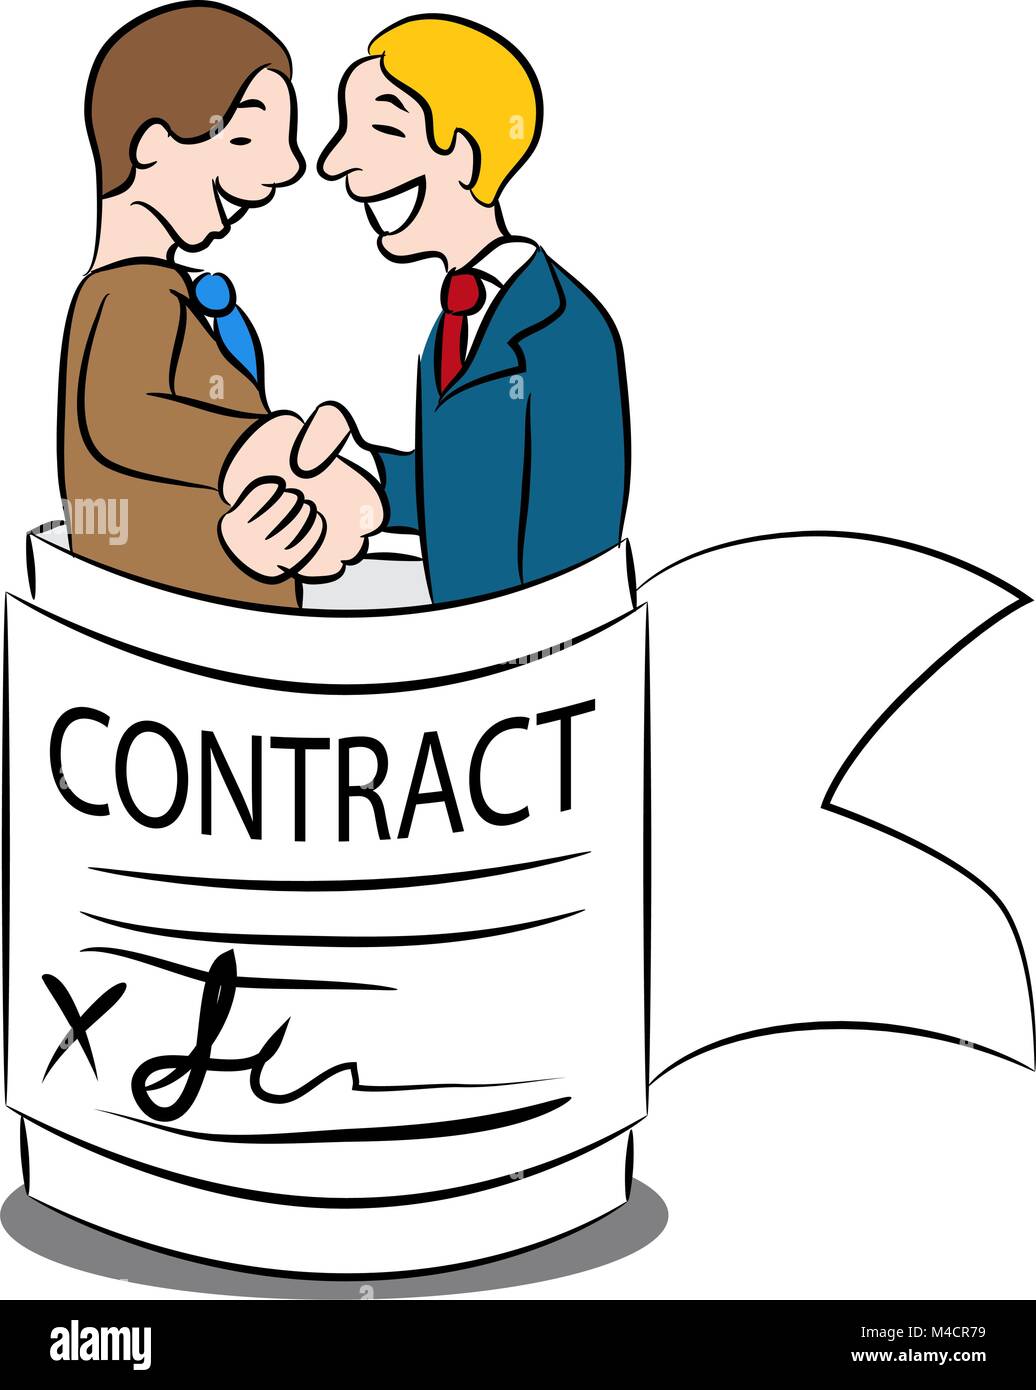 An image of a cartoon representing an agreement in a contract. Stock Vector